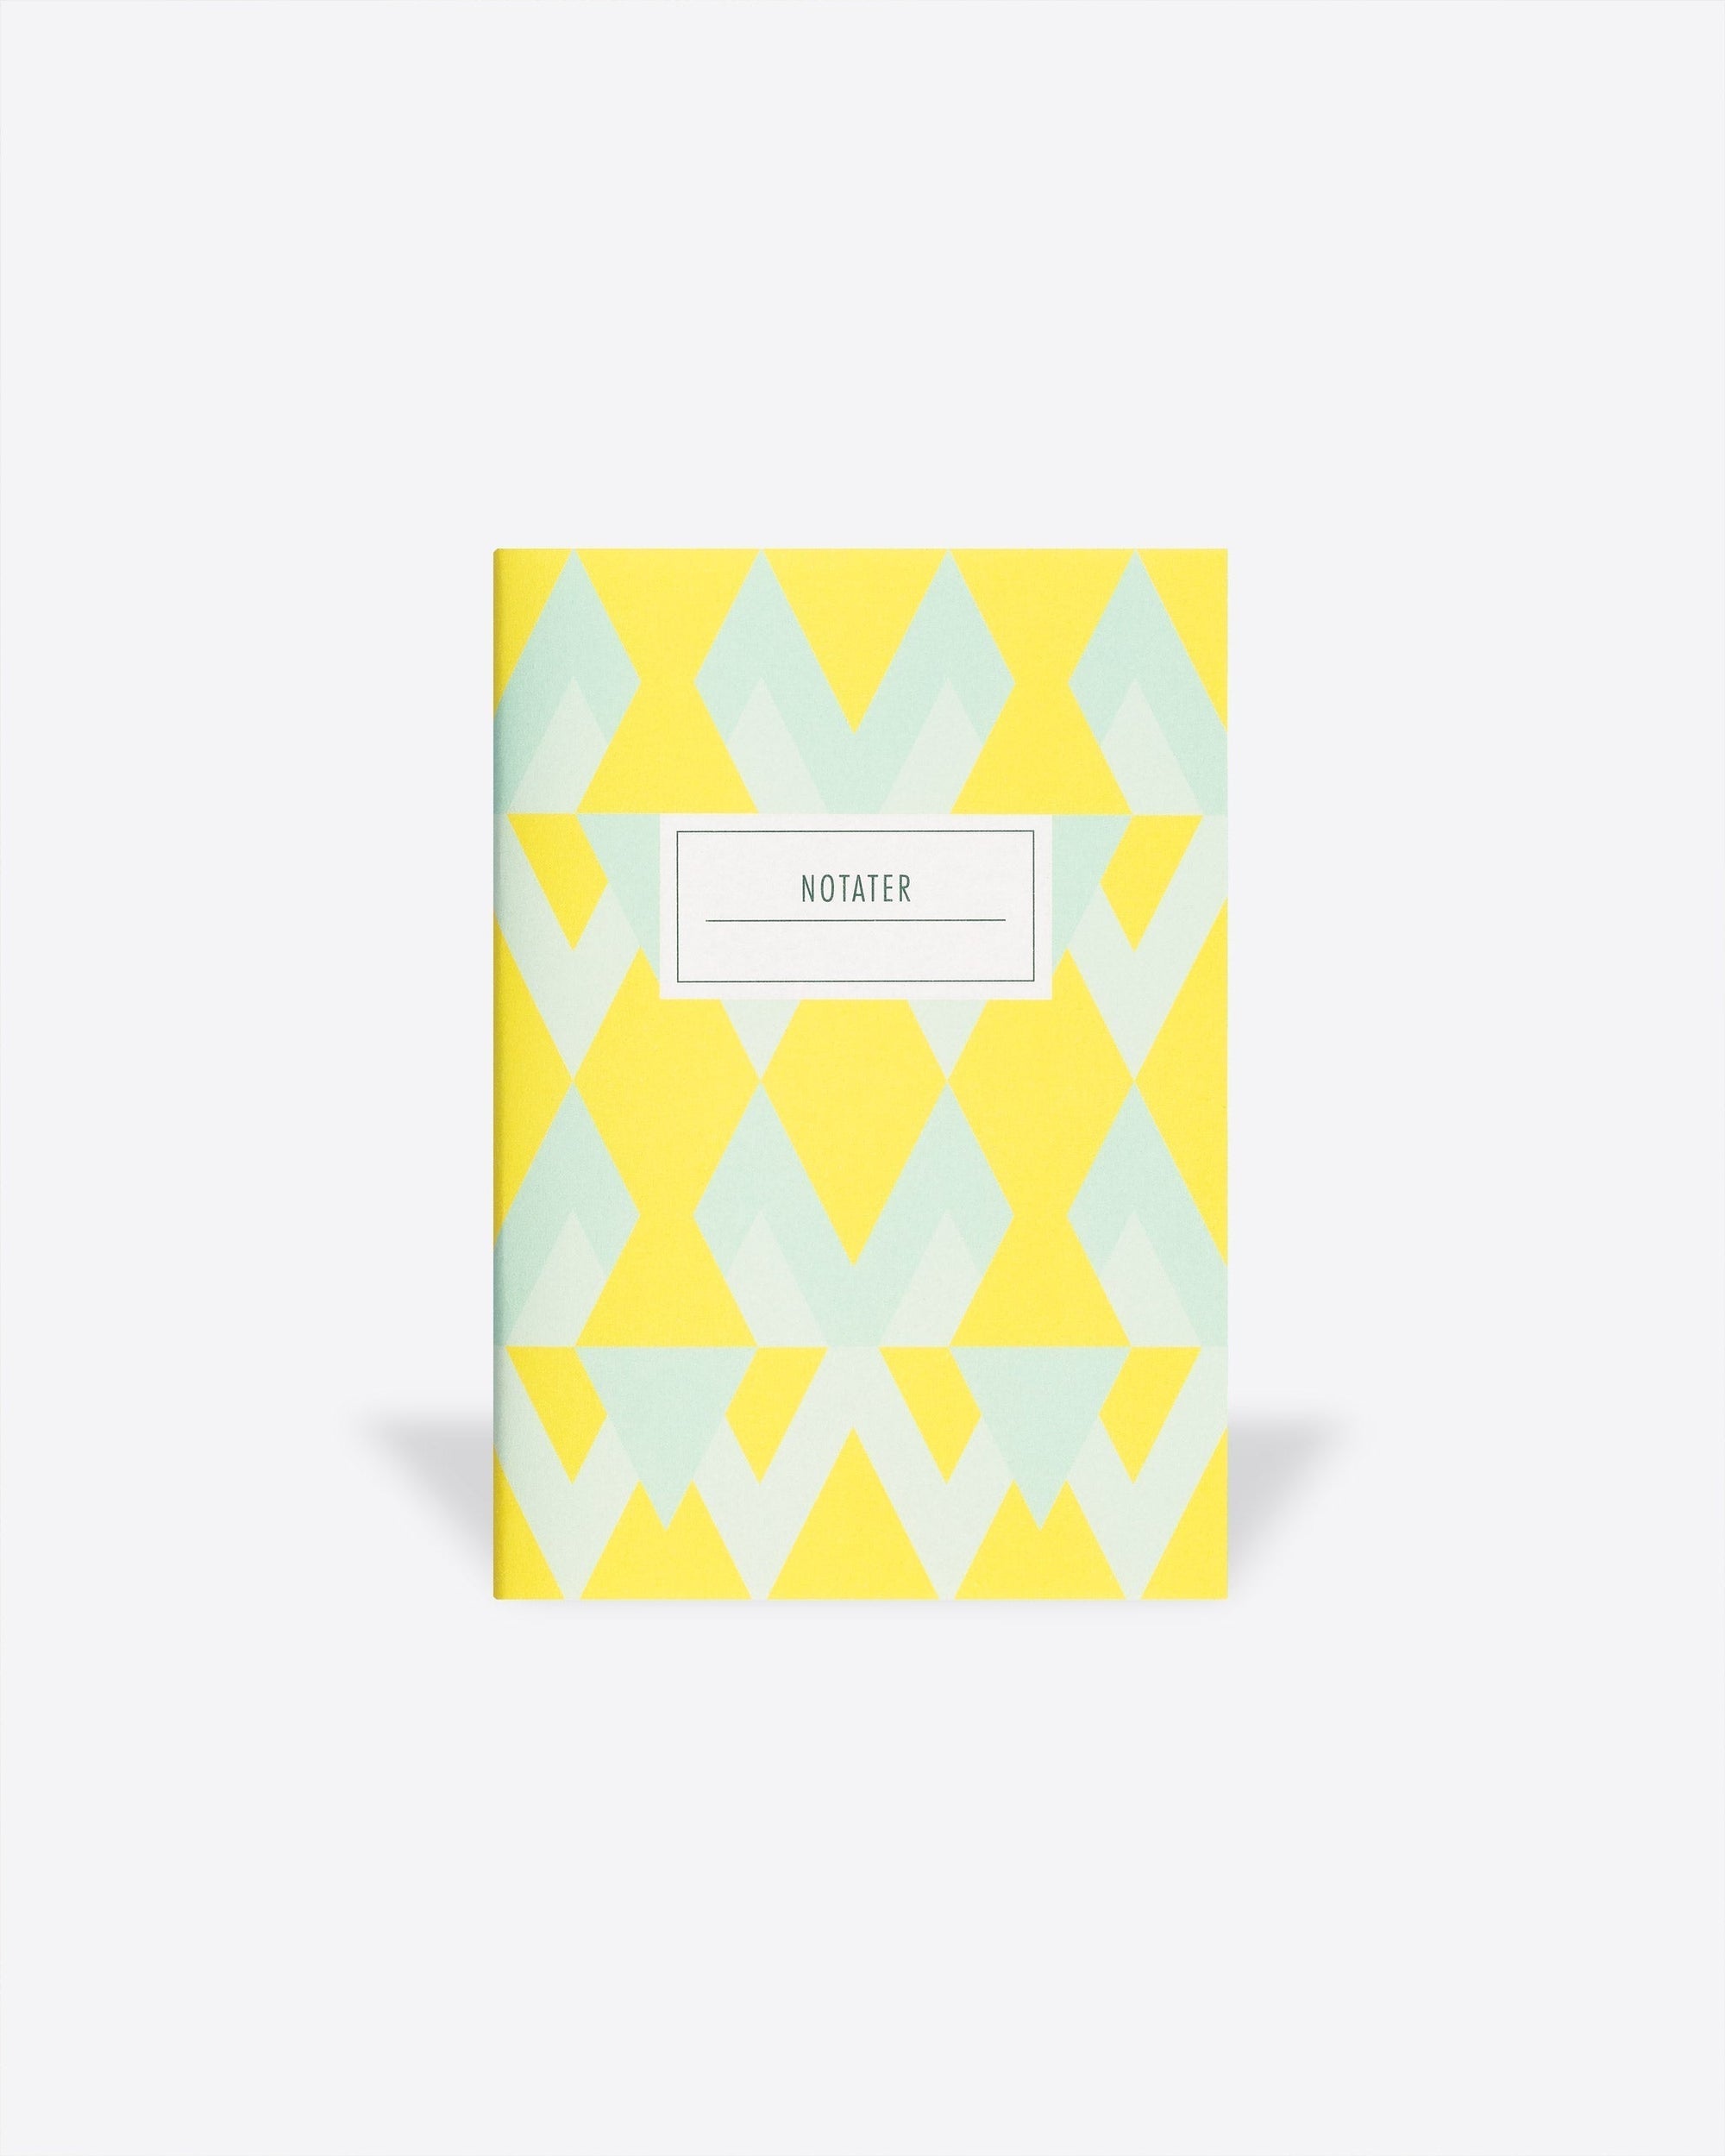 Notebook with dust jacket